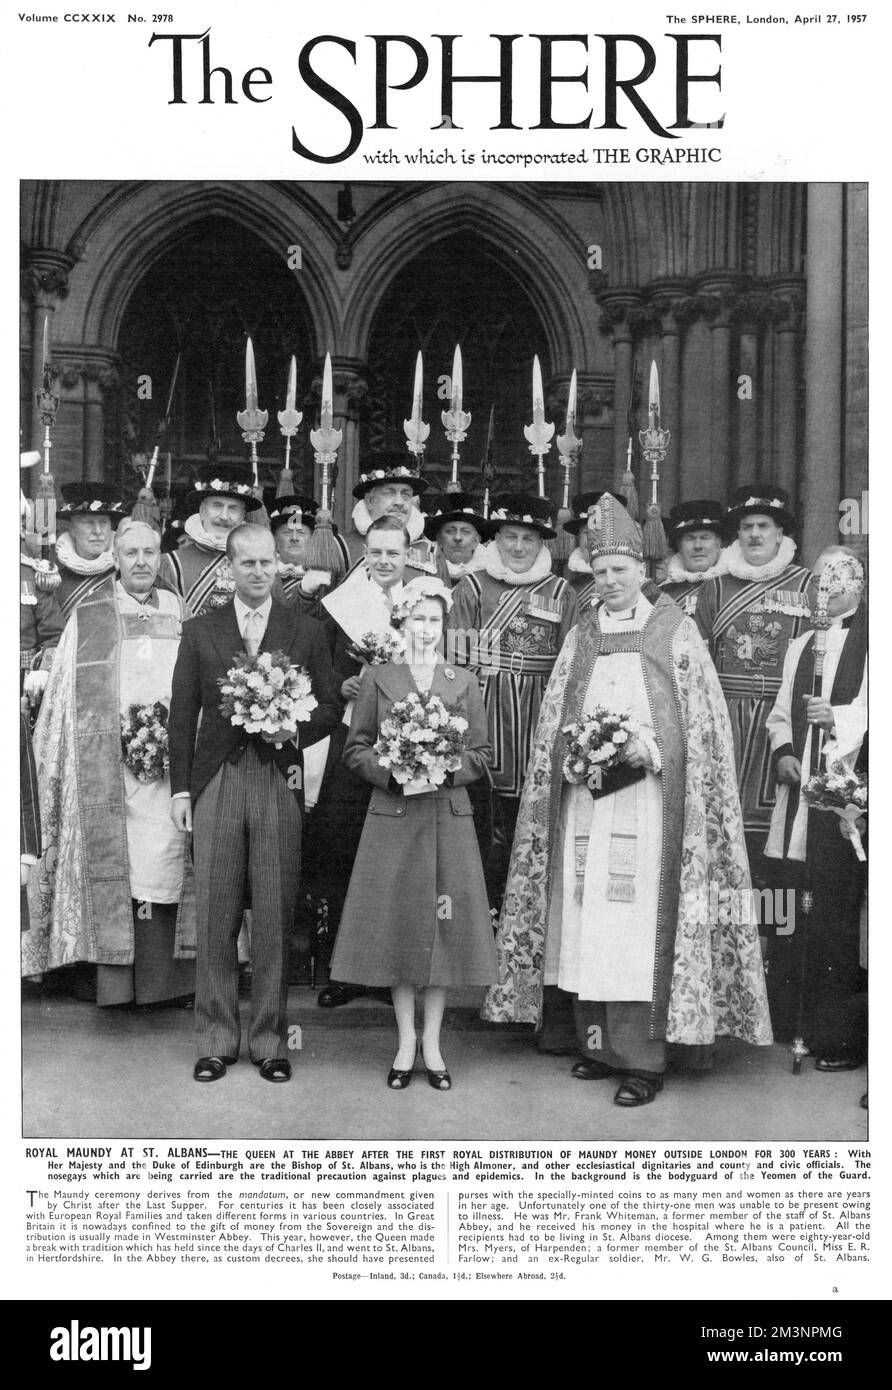 Royal Maundy at St. Albans Abbey.  The Queen, accompanied by Prince Philip, Duke of Edinburgh, attends the first royal distribution of Maundy money outside London in 300 years.  They are pictured with the Bishop of St Albans and other ecclesiastical dignitaries.  The nosegays carried are the traditional precaution against plagues and epidemics.  In the background is the bodyguard of the Yeoman of the Guard.     Date: 1957 Stock Photo